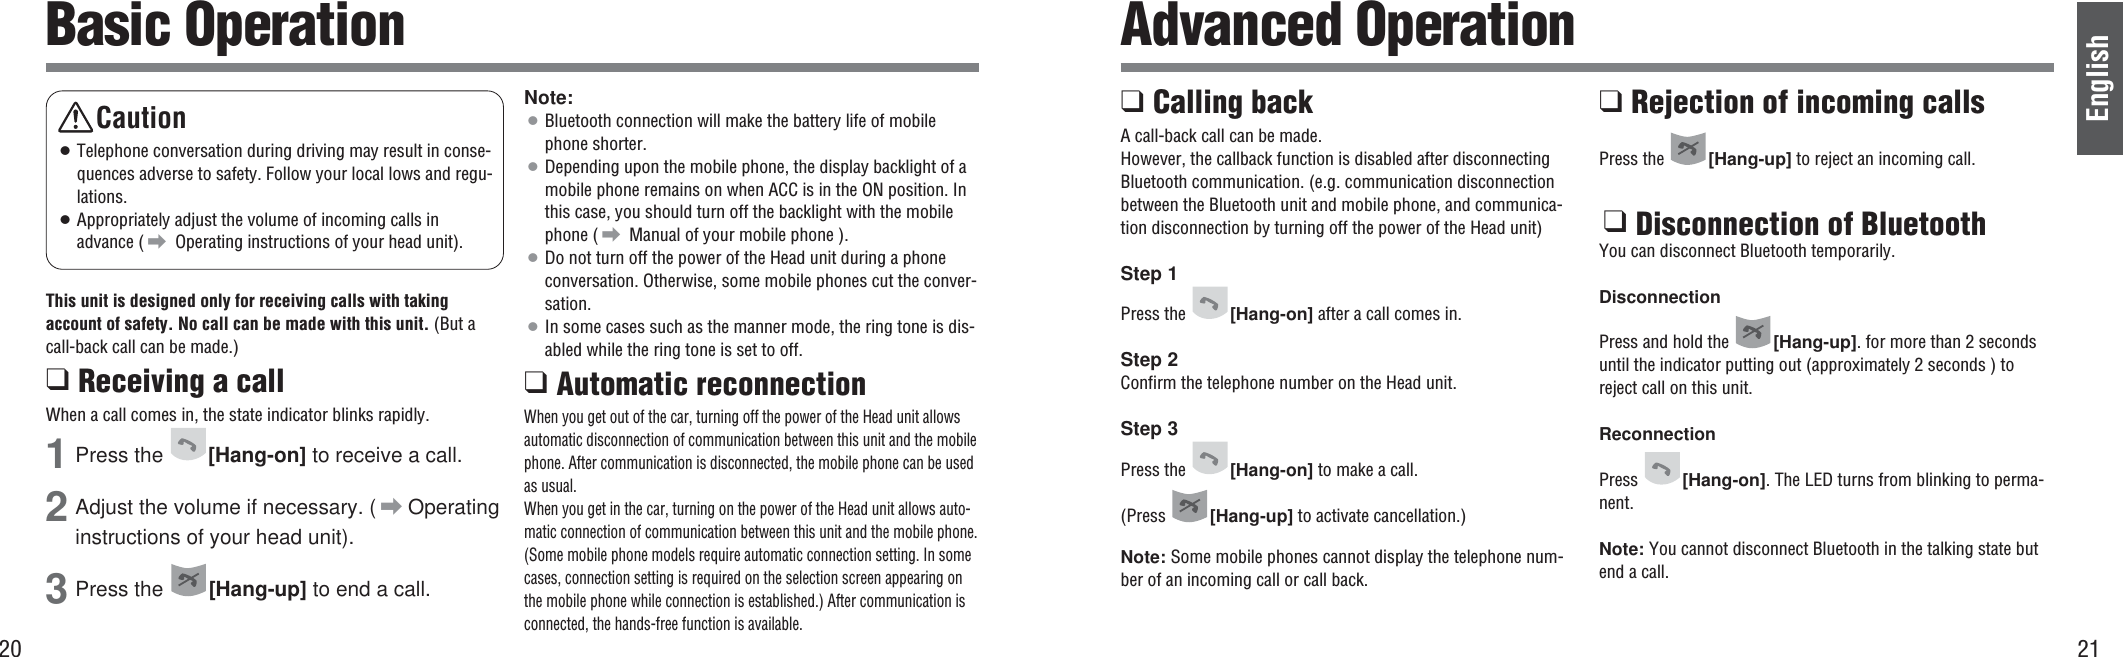 20English21Basic Operation Advanced OperationThis unit is designed only for receiving calls with takingaccount of safety. No call can be made with this unit. (But acall-back call can be made.)❑ Receiving a callWhen a call comes in, the state indicator blinks rapidly.1Press the [Hang-on] to receive a call.2Adjust the volume if necessary. ( \Operatinginstructions of your head unit).3Press the  [Hang-up] to end a call.Note:¡Bluetooth connection will make the battery life of mobilephone shorter.¡Depending upon the mobile phone, the display backlight of amobile phone remains on when ACC is in the ON position. Inthis case, you should turn off the backlight with the mobilephone ( \ Manual of your mobile phone ).¡Do not turn off the power of the Head unit during a phoneconversation. Otherwise, some mobile phones cut the conver-sation.¡In some cases such as the manner mode, the ring tone is dis-abled while the ring tone is set to off.❑ Automatic reconnection When you get out of the car, turning off the power of the Head unit allowsautomatic disconnection of communication between this unit and the mobilephone. After communication is disconnected, the mobile phone can be usedas usual.When you get in the car, turning on the power of the Head unit allows auto-matic connection of communication between this unit and the mobile phone.(Some mobile phone models require automatic connection setting. In somecases, connection setting is required on the selection screen appearing onthe mobile phone while connection is established.) After communication isconnected, the hands-free function is available.❑ Calling backA call-back call can be made.However, the callback function is disabled after disconnectingBluetooth communication. (e.g. communication disconnectionbetween the Bluetooth unit and mobile phone, and communica-tion disconnection by turning off the power of the Head unit) Step 1Press the  [Hang-on] after a call comes in.Step 2Confirm the telephone number on the Head unit.Step 3Press the  [Hang-on] to make a call.(Press  [Hang-up] to activate cancellation.)Note: Some mobile phones cannot display the telephone num-ber of an incoming call or call back.❑ Rejection of incoming callsPress the  [Hang-up] to reject an incoming call.❑ Disconnection of BluetoothYou can disconnect Bluetooth temporarily.DisconnectionPress and hold the  [Hang-up]. for more than 2 secondsuntil the indicator putting out (approximately 2 seconds ) toreject call on this unit.ReconnectionPress  [Hang-on]. The LED turns from blinking to perma-nent.Note: You cannot disconnect Bluetooth in the talking state butend a call.Caution¡Telephone conversation during driving may result in conse-quences adverse to safety. Follow your local lows and regu-lations.¡Appropriately adjust the volume of incoming calls inadvance ( \ Operating instructions of your head unit).